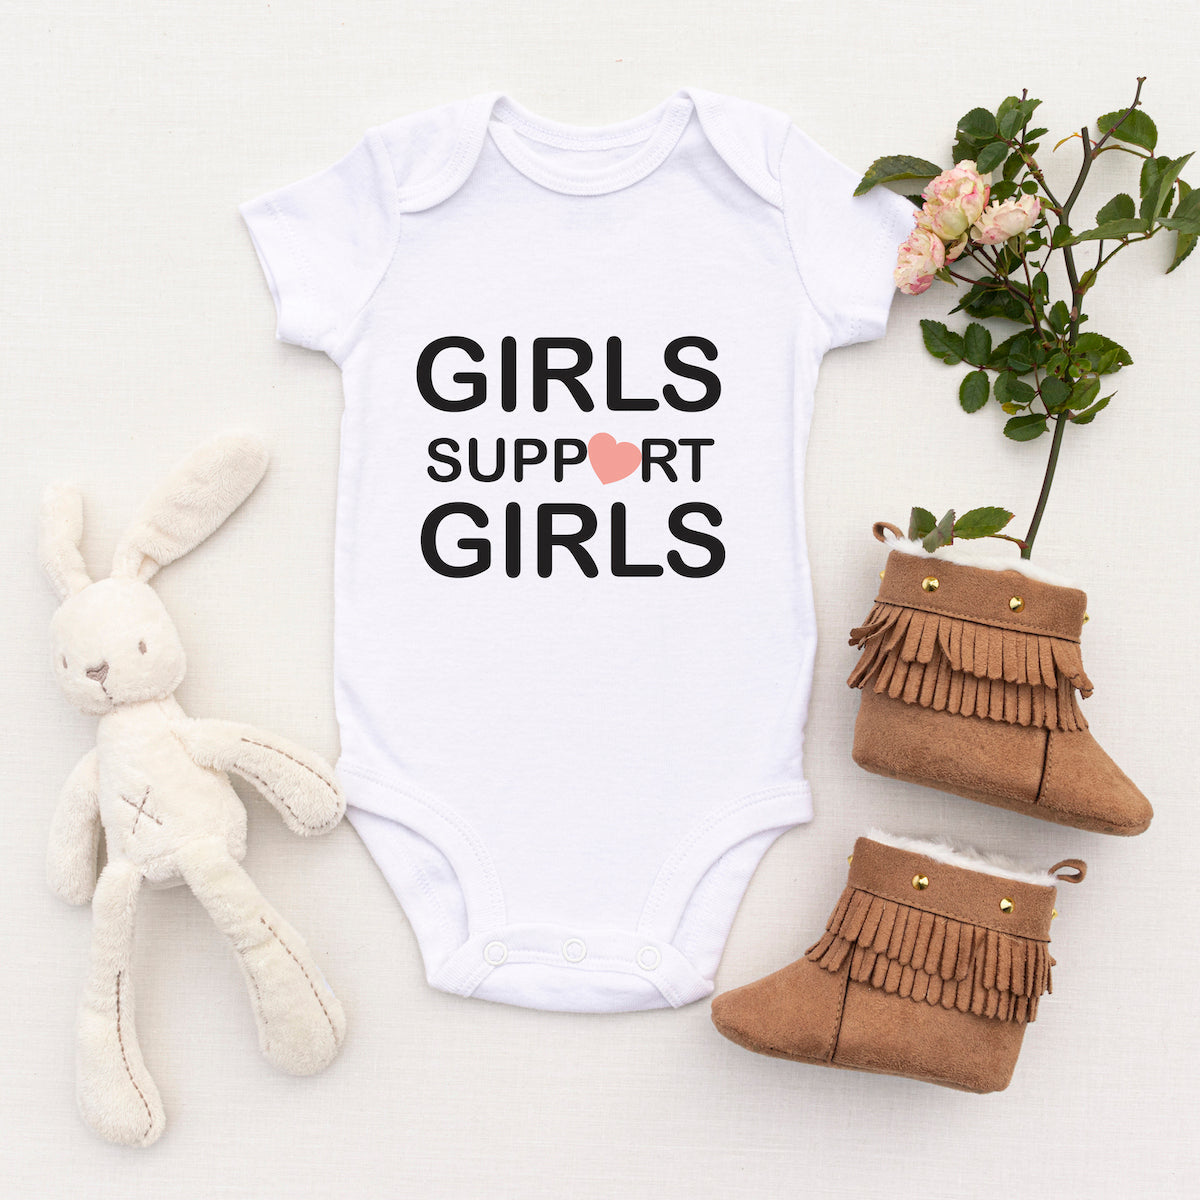 Personalised White Baby Body Suit Grow Vest - Support Girls